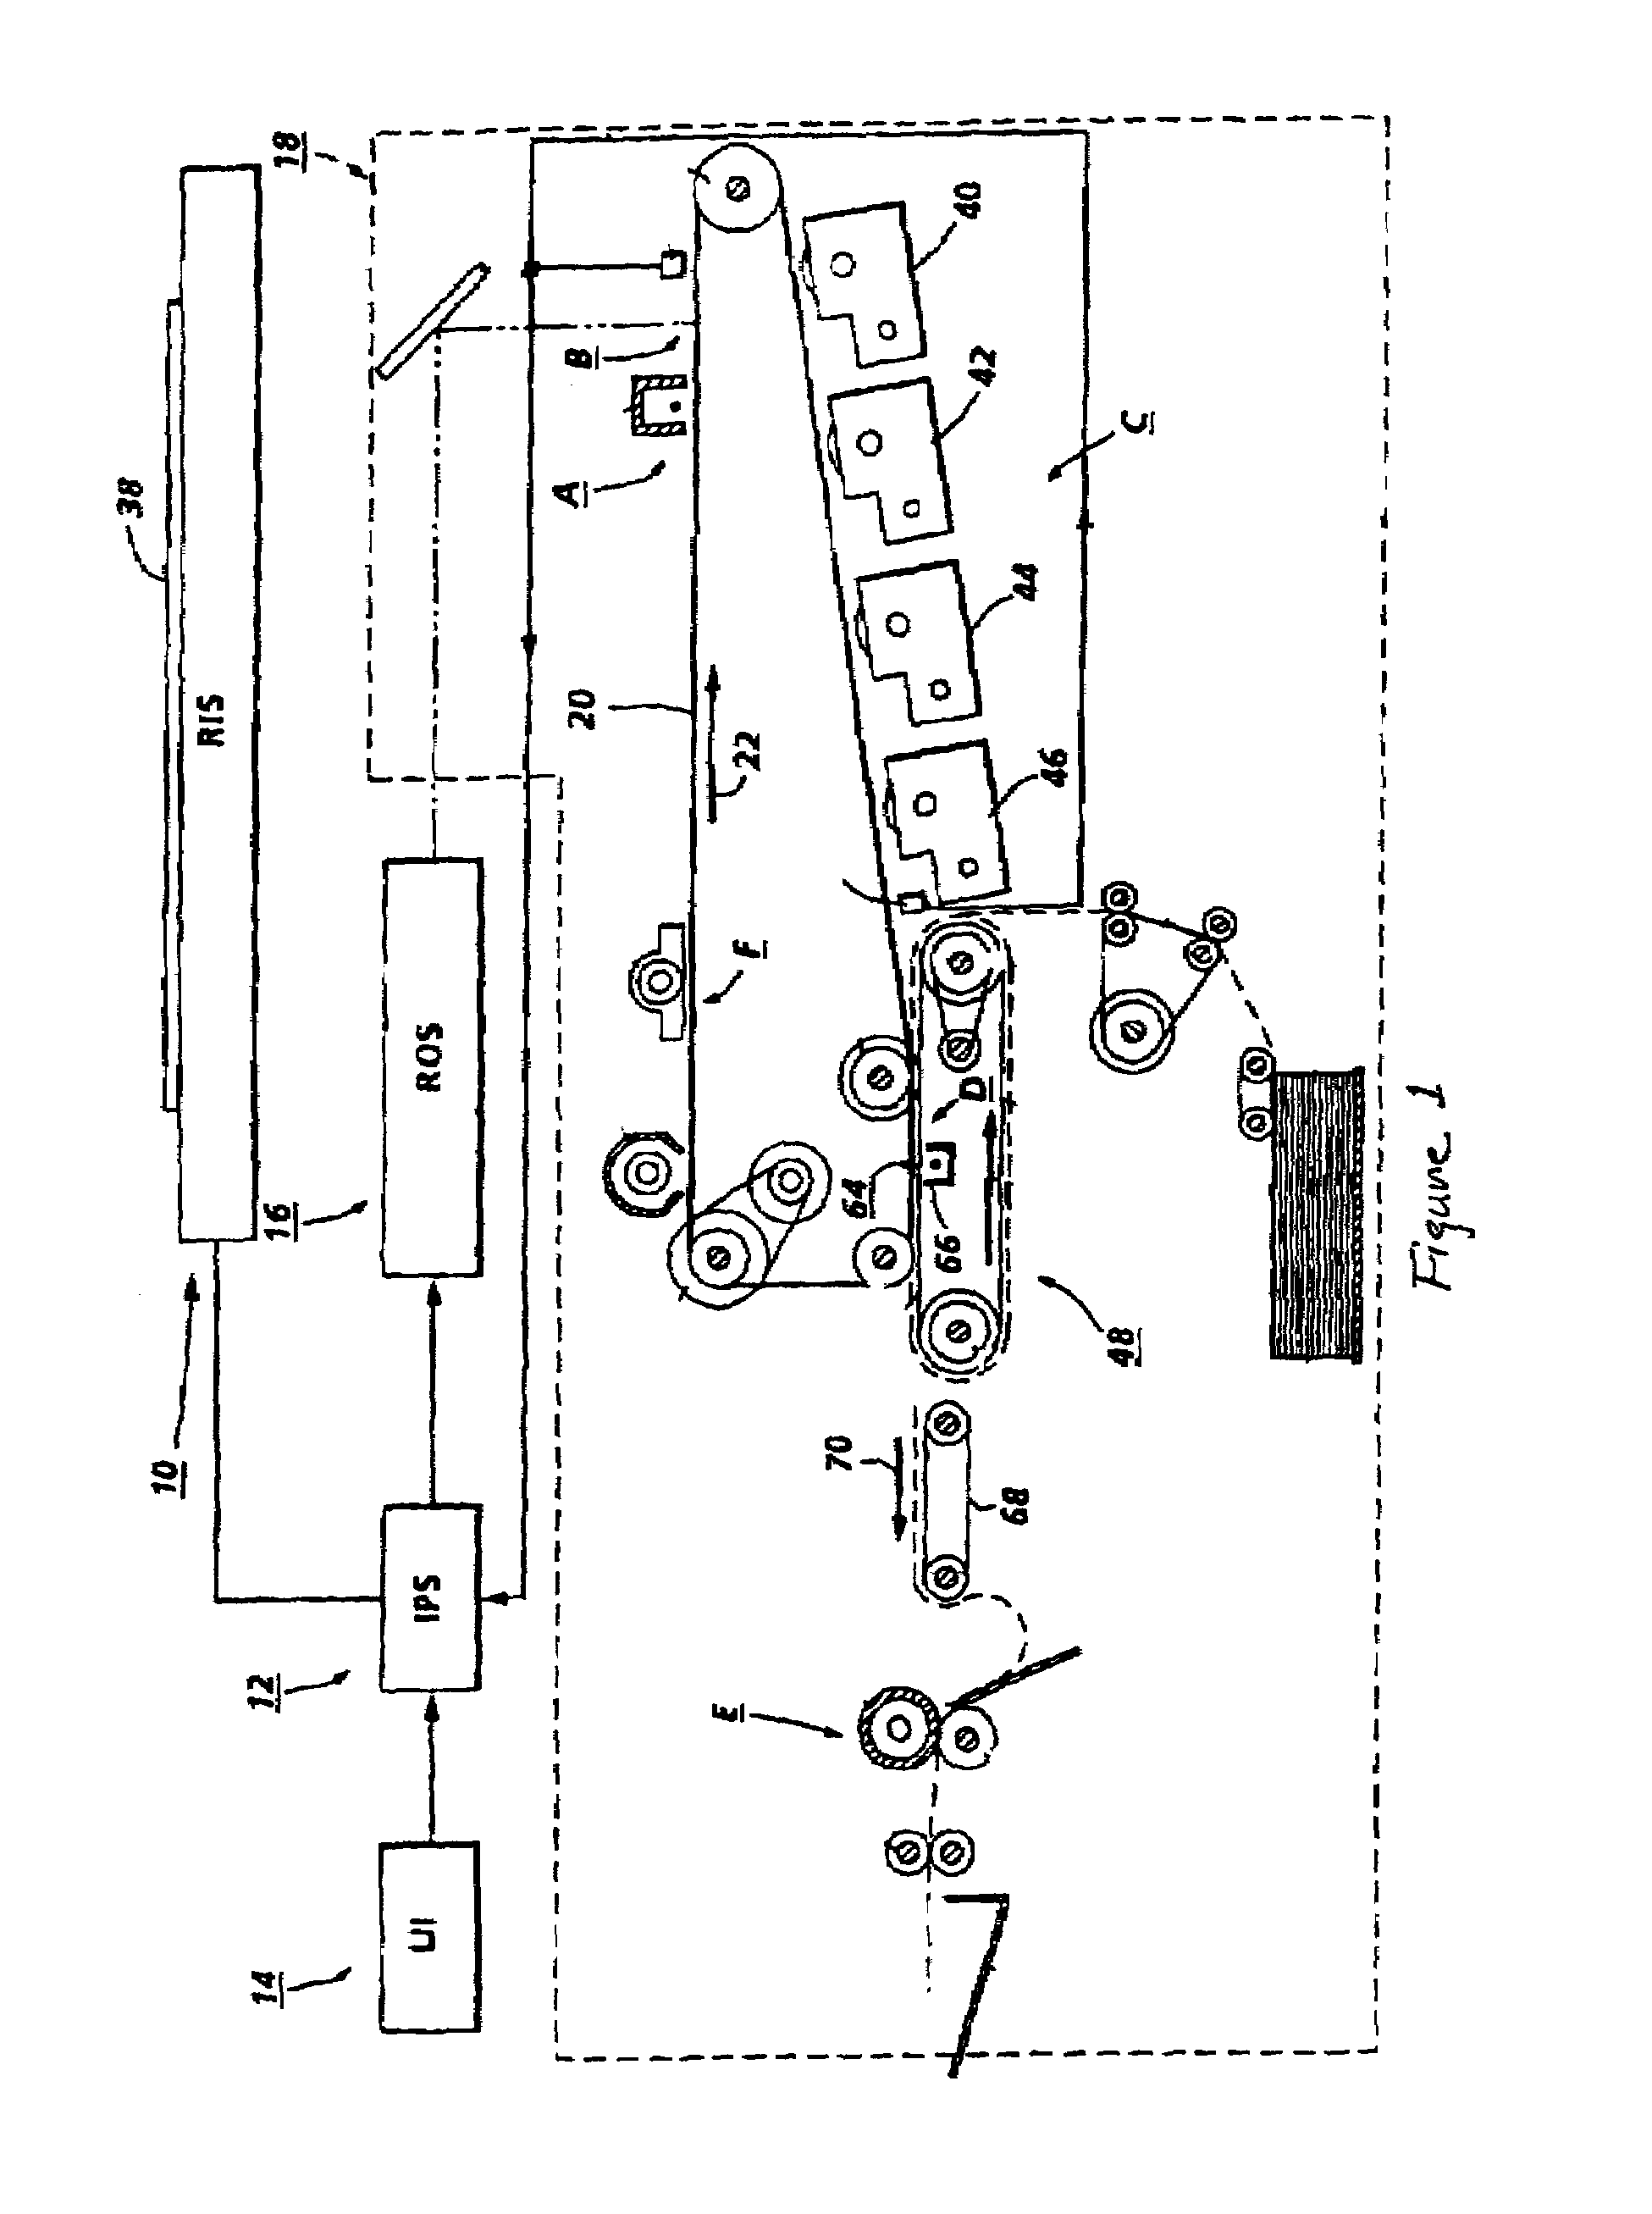 Printer image processing system with customized tone reproduction curves